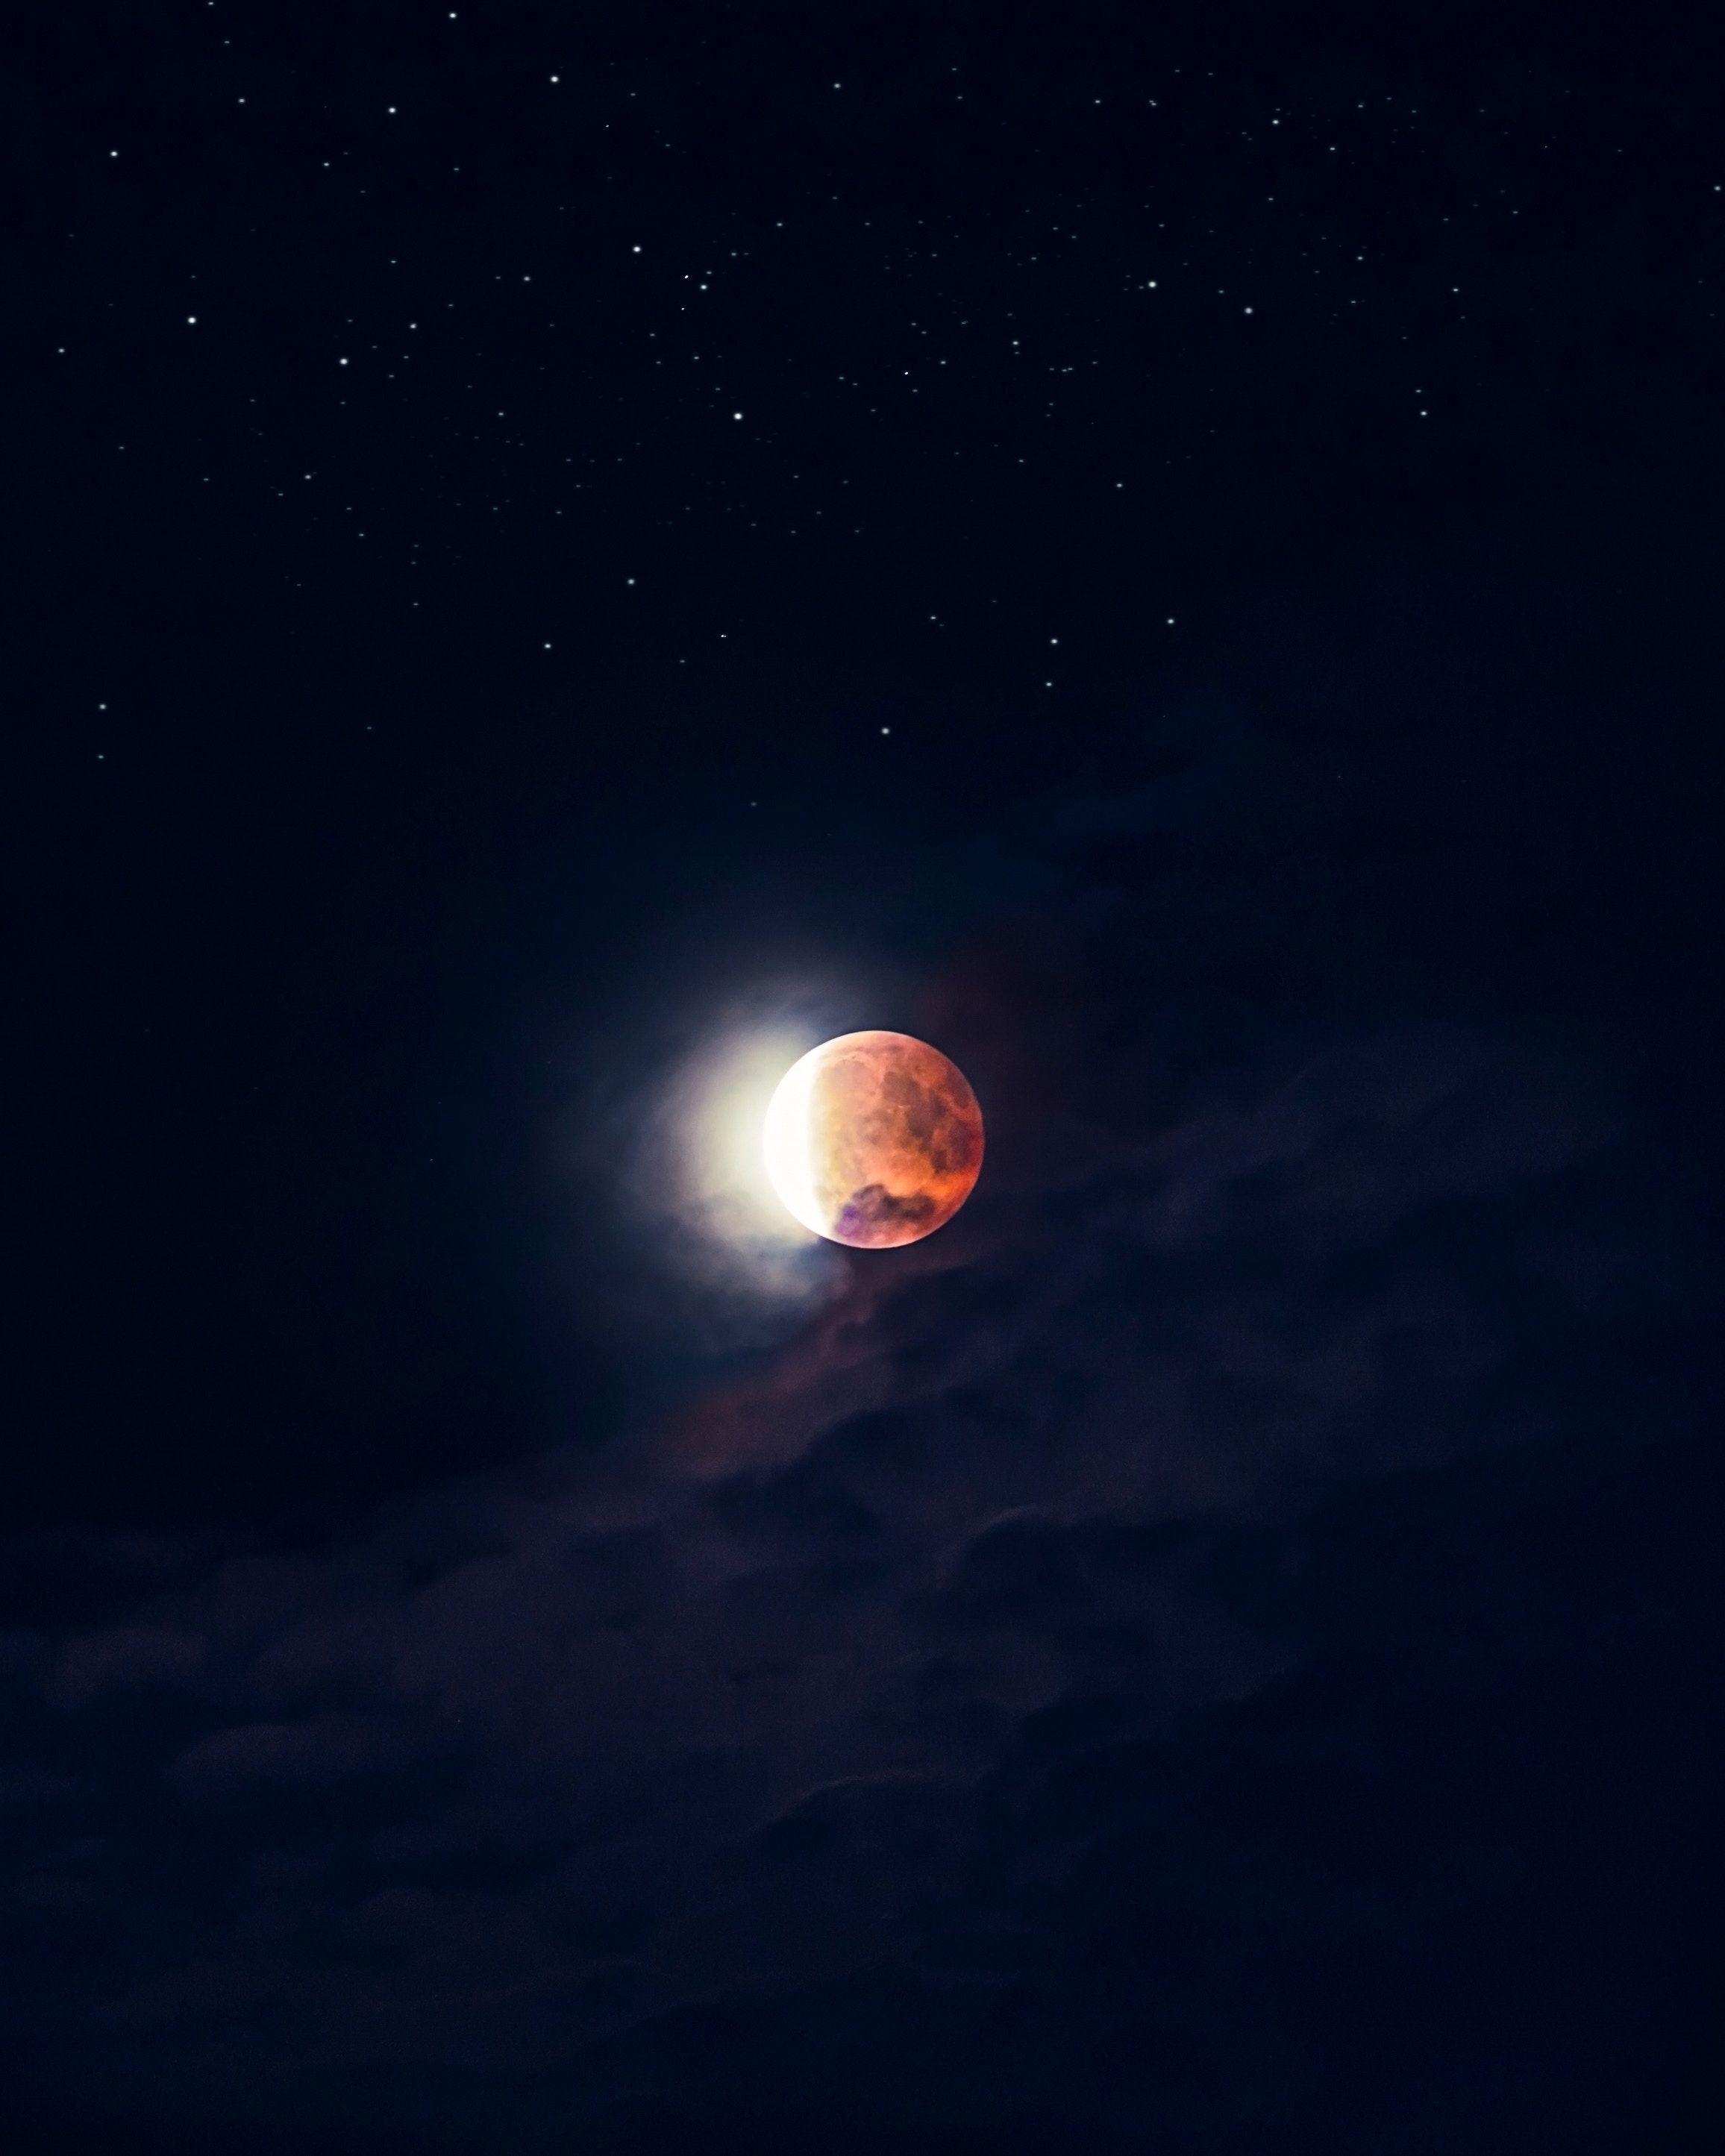 Download Universe Blood Moon Eclipse Android Wallpaper. You can